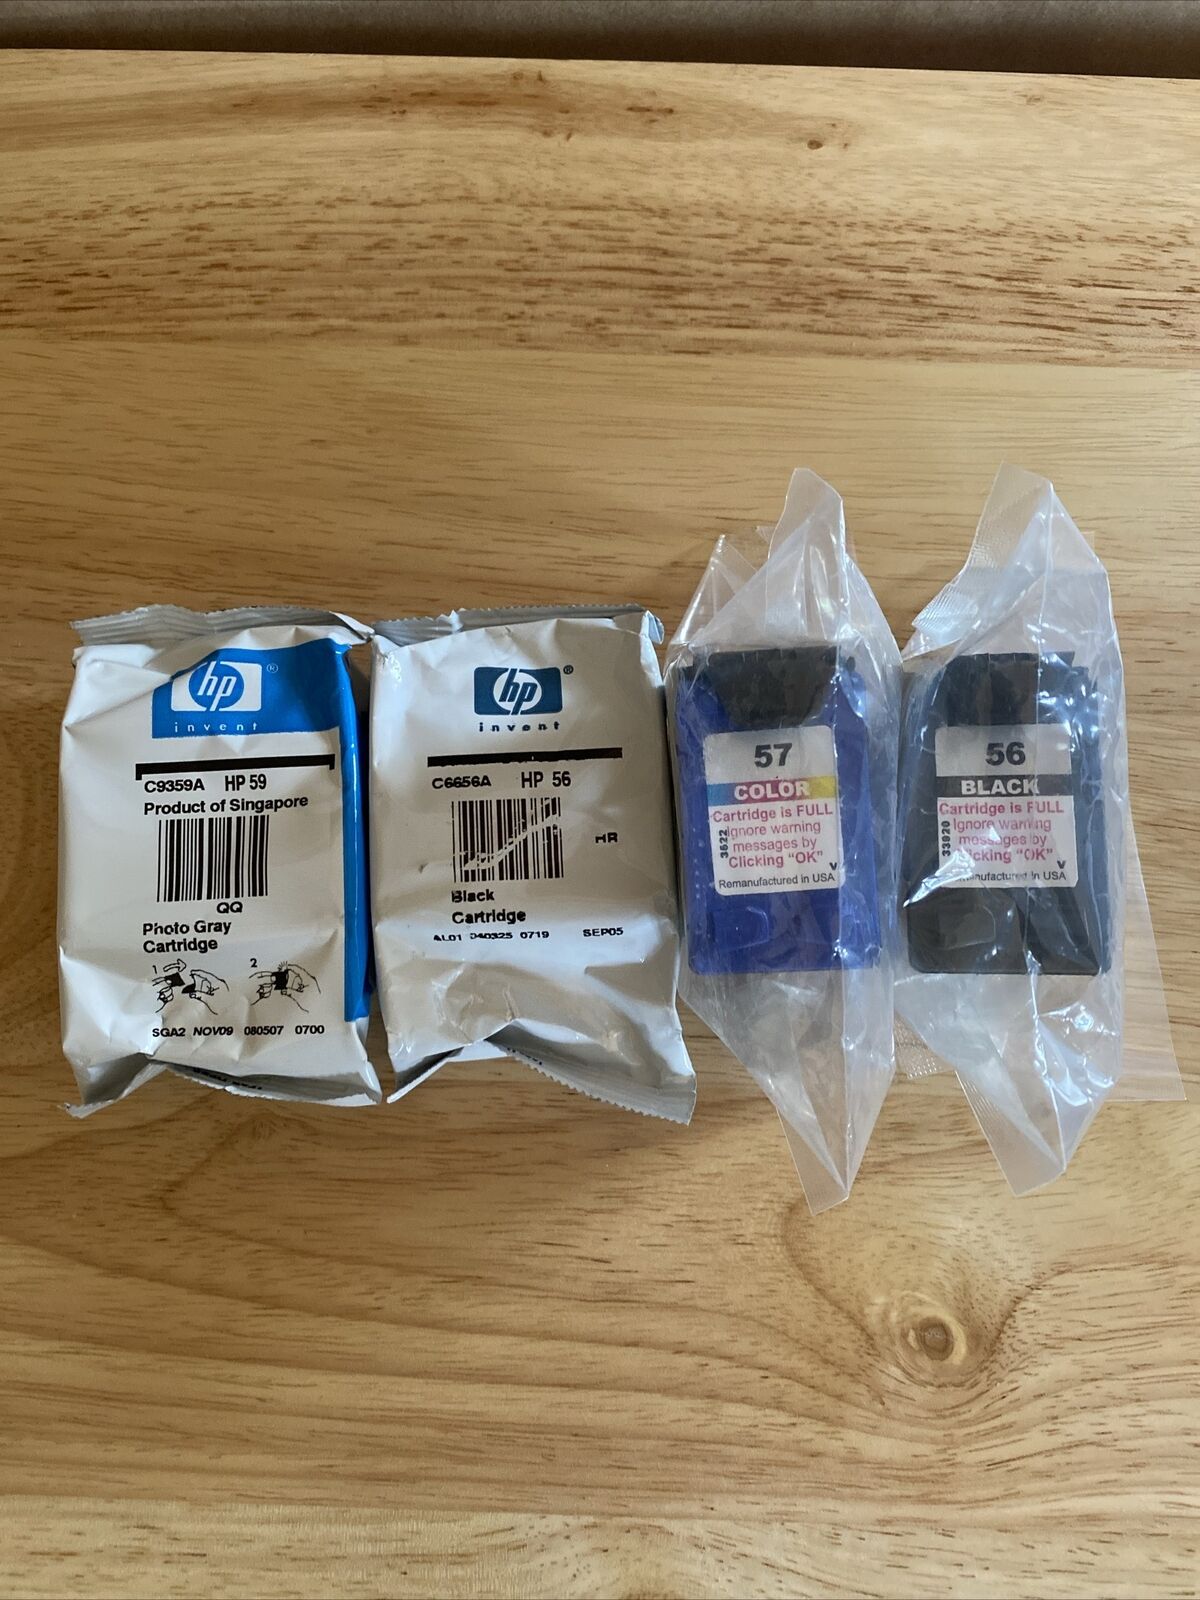 (1) HP 56 (1) HP 59 (1) 56 (1) 57 Black And Tricolor Ink Cartridges Lot Set of 4